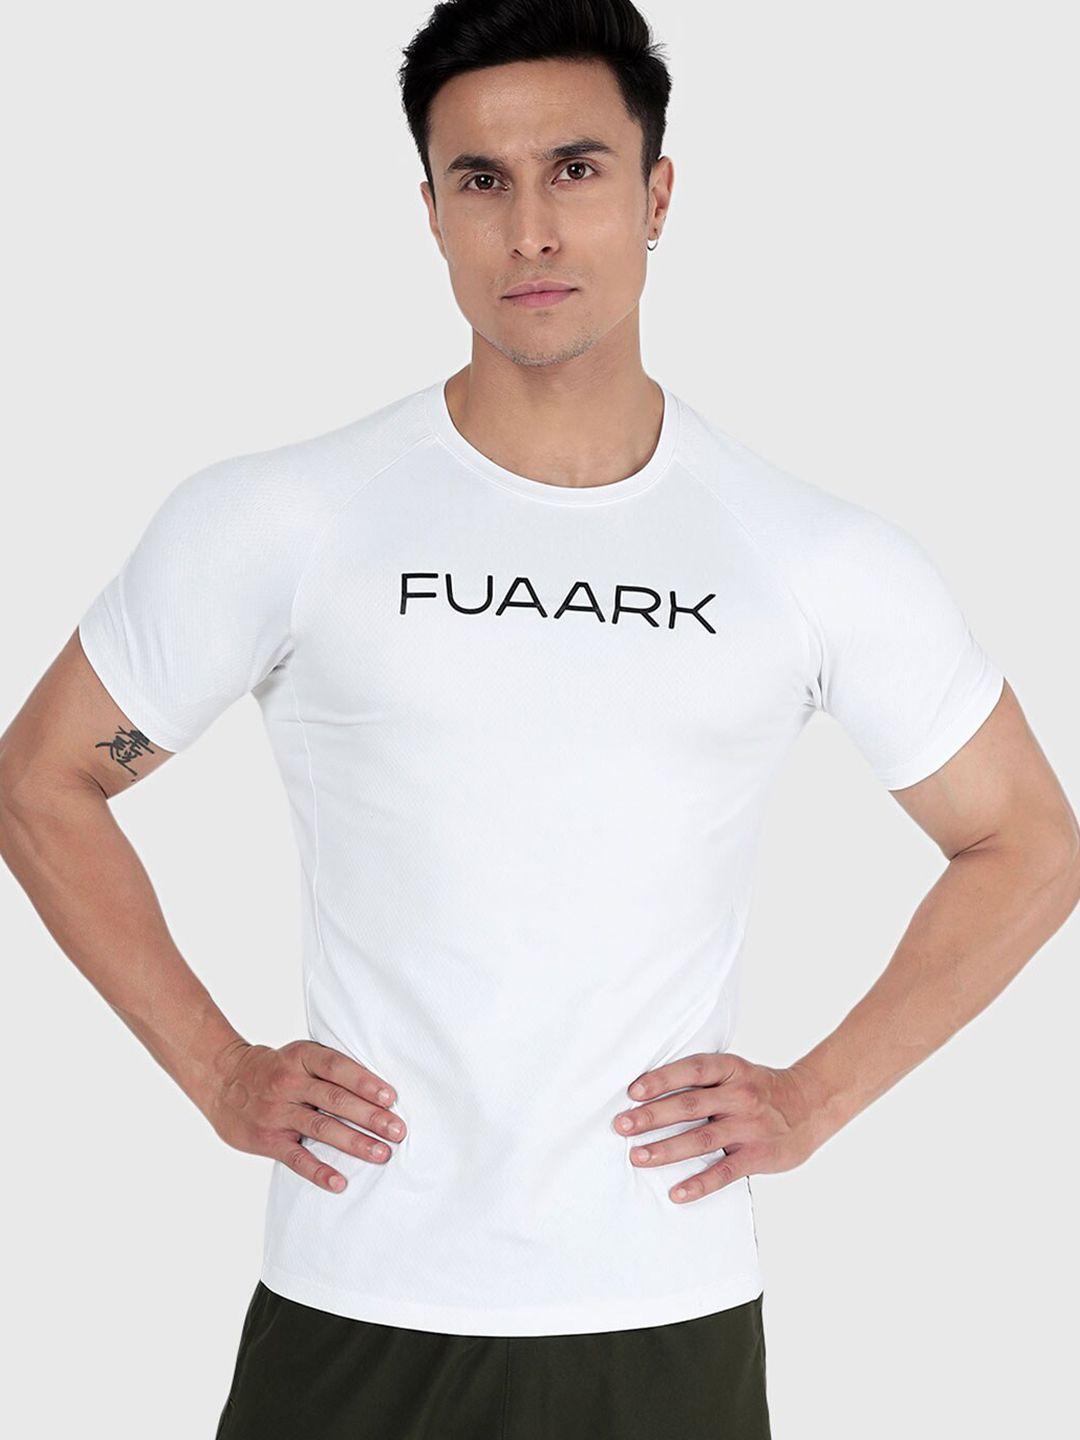 fuaark-typography-printed-anti-odour-sport-t-shirt